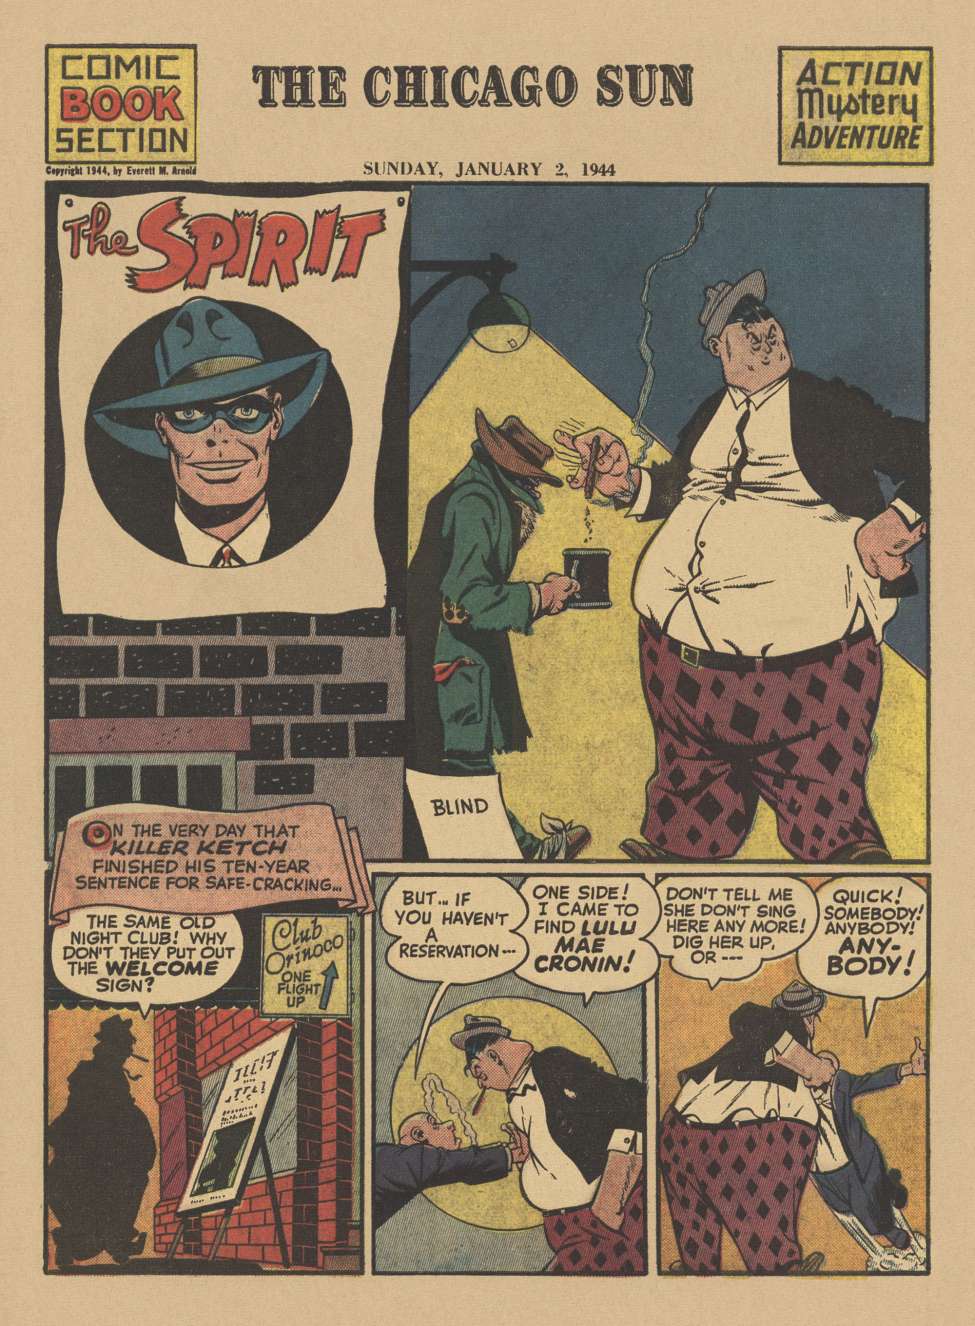 Comic Book Cover For The Spirit (1944-01-02) - Chicago Sun